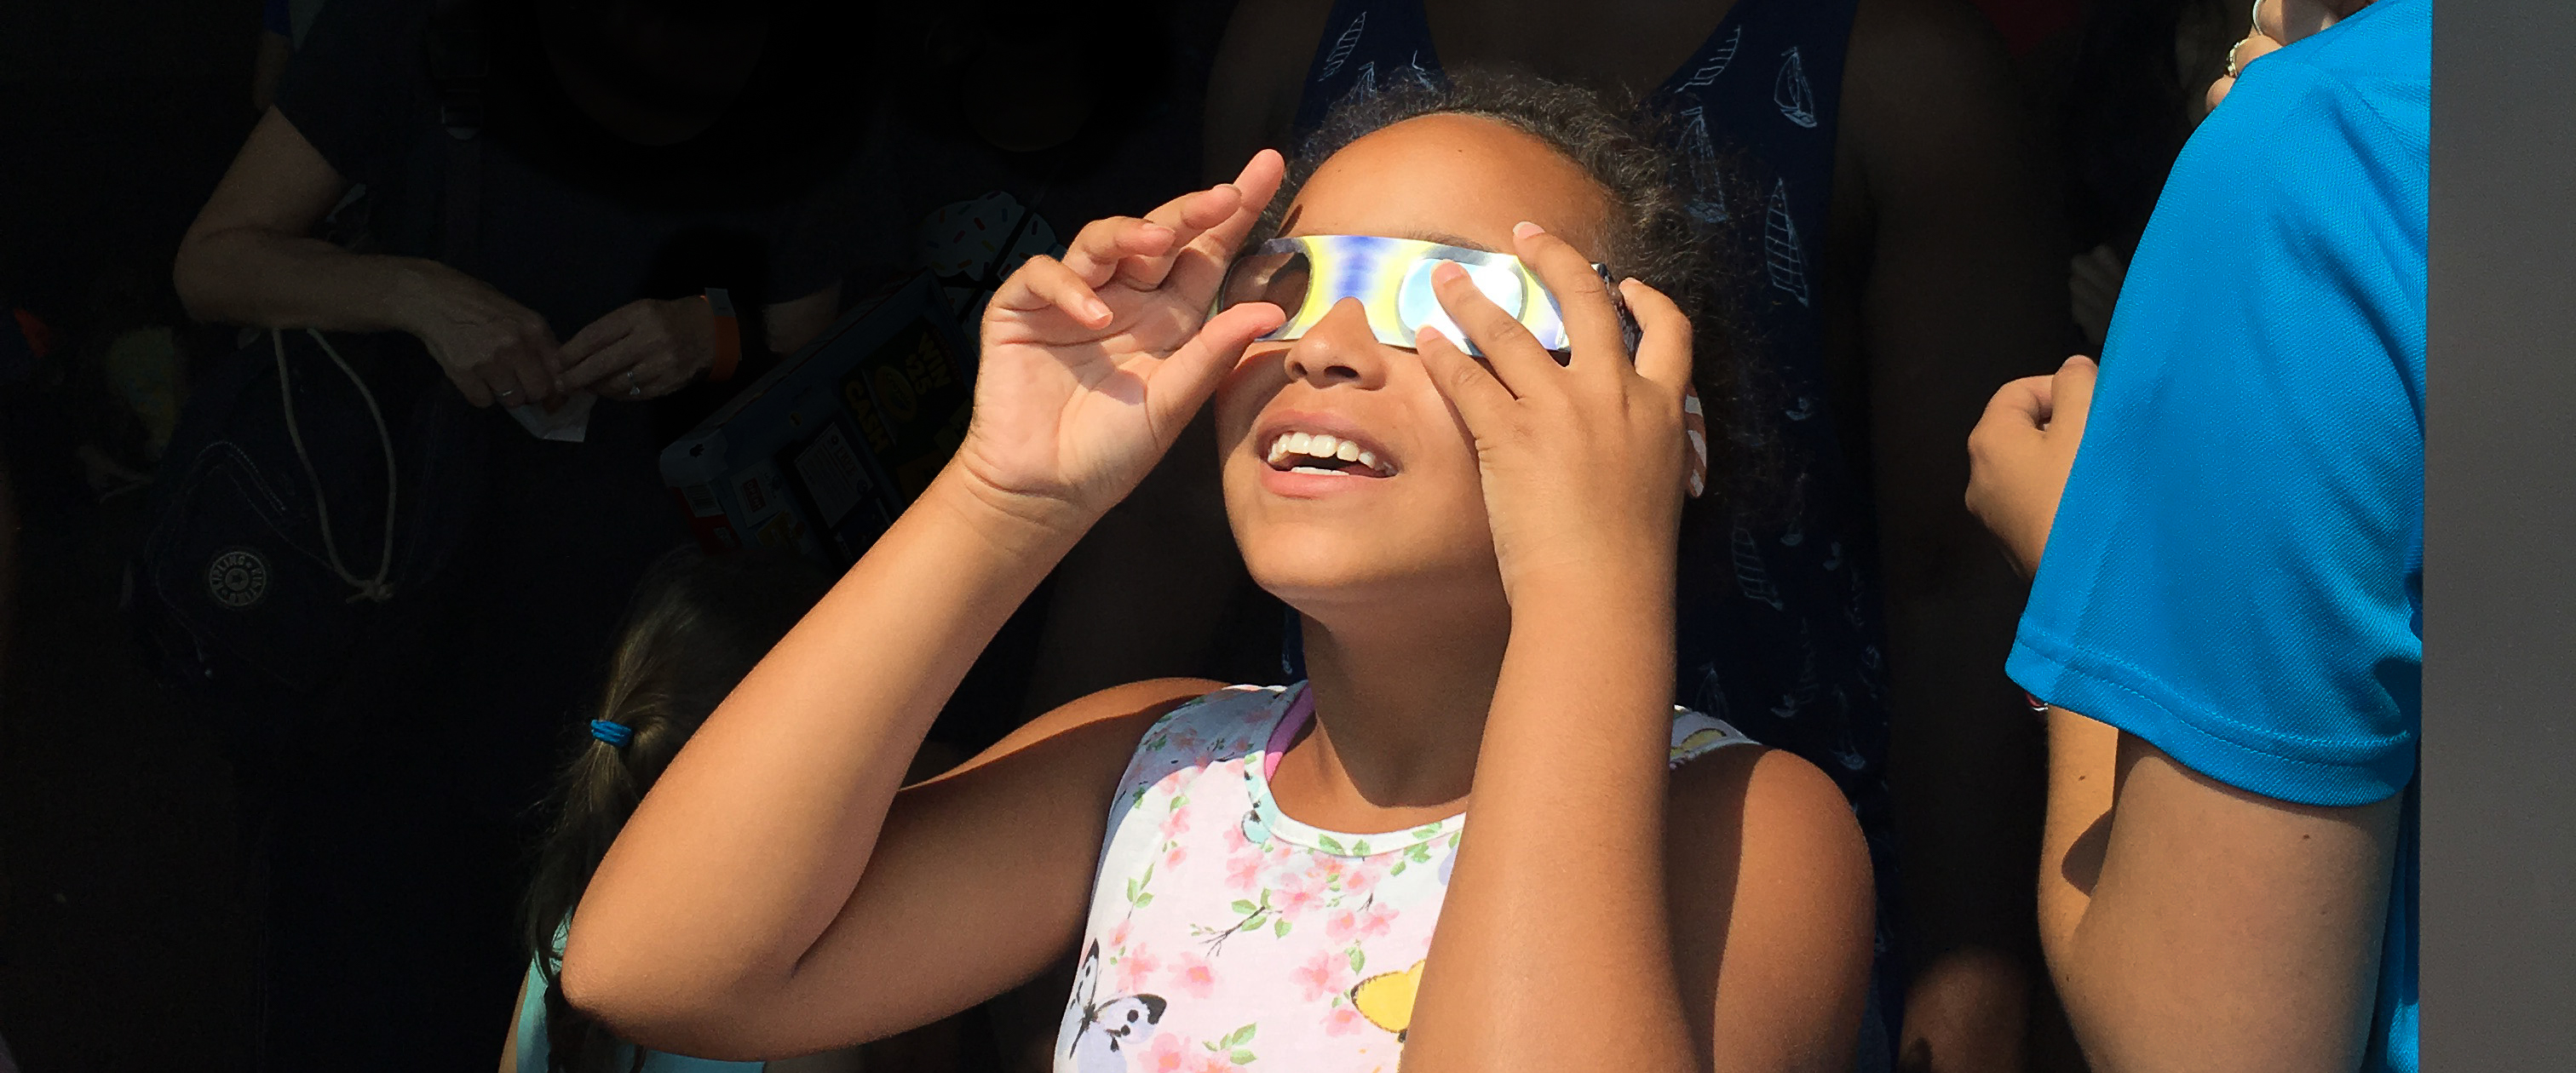 Photo of a young girl using eclipse glasses to look at the sky.